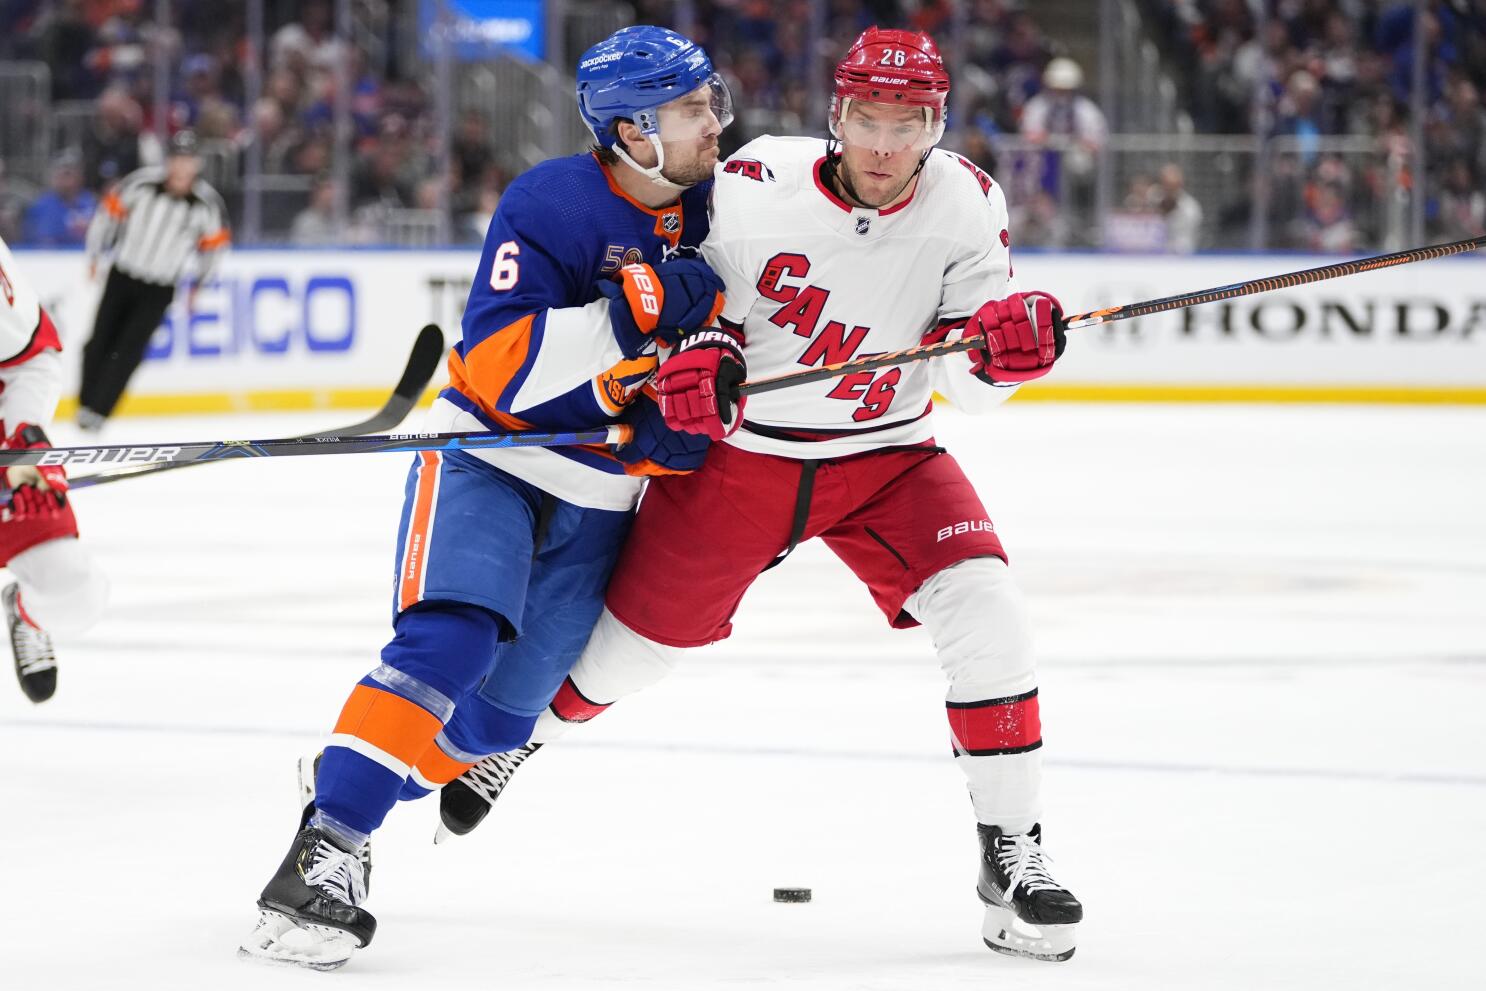 NHL: Devils beat Rangers in OT, on to Cup Finals - Deseret News